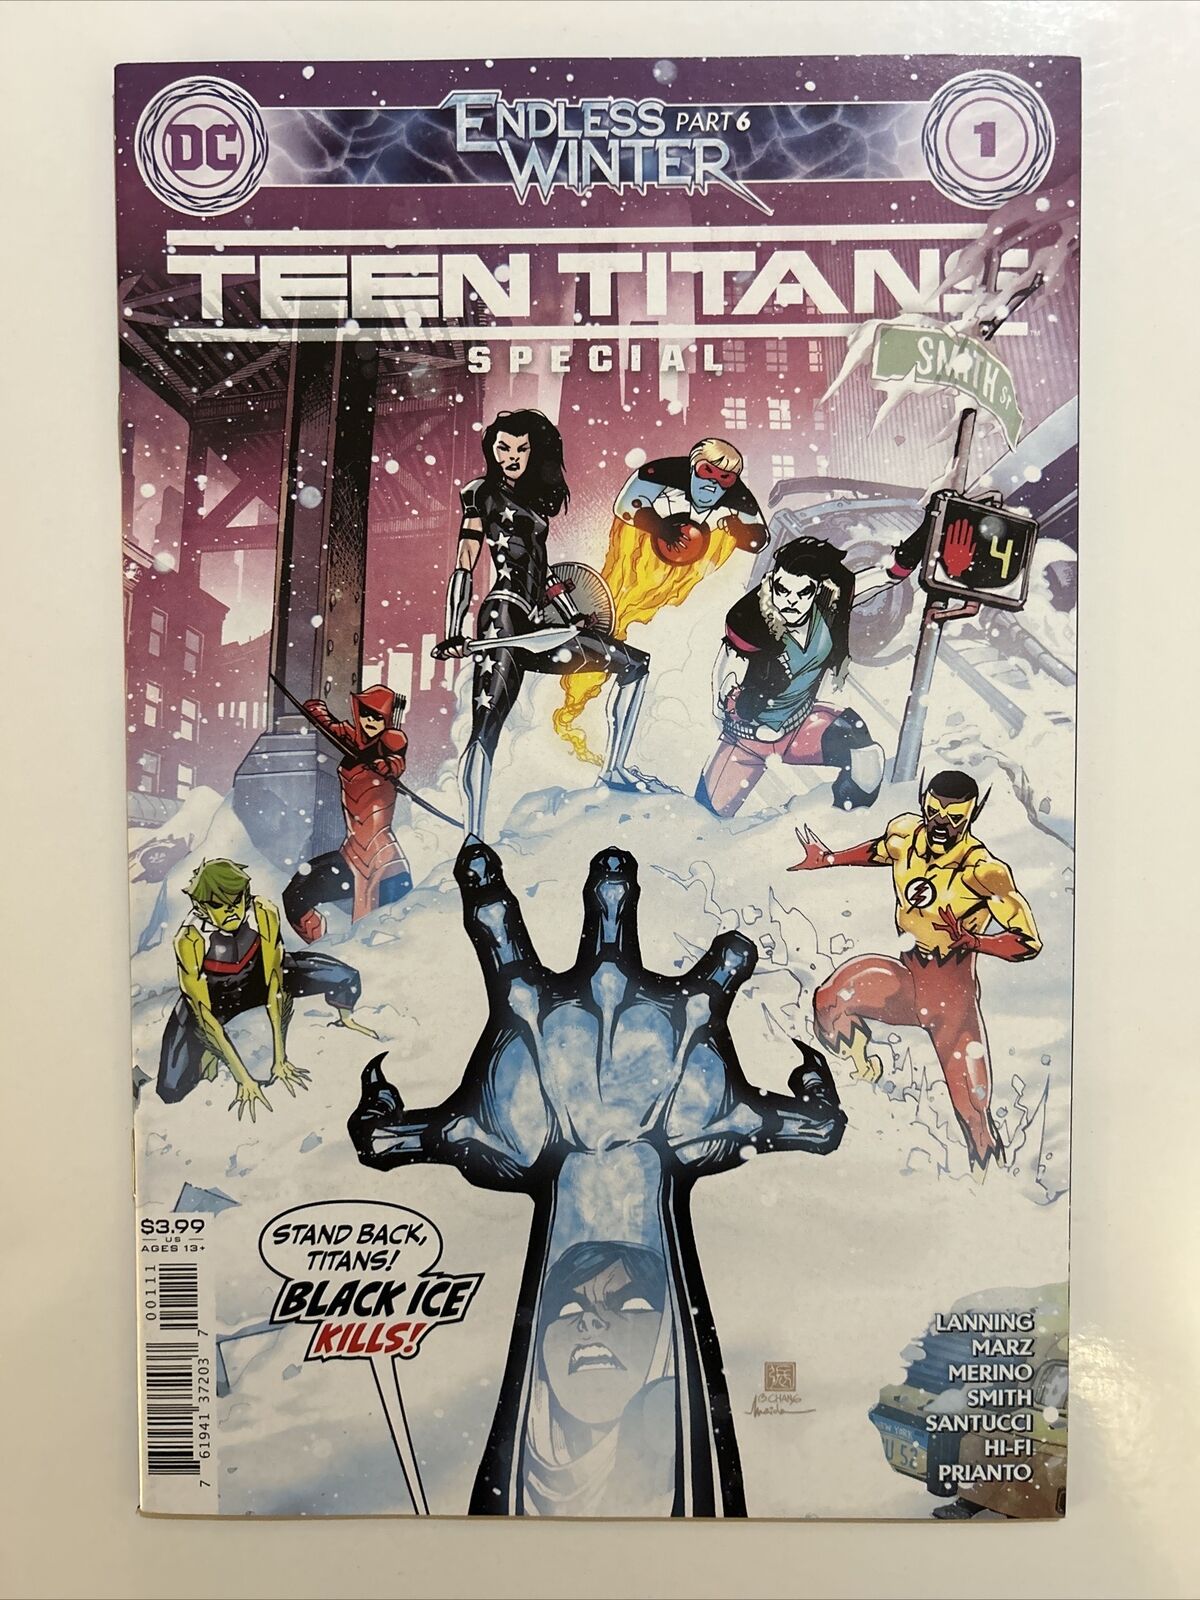 Teen Titans Endless Winter Special #1 1st App.of Summer Zahid Black Ice. DC